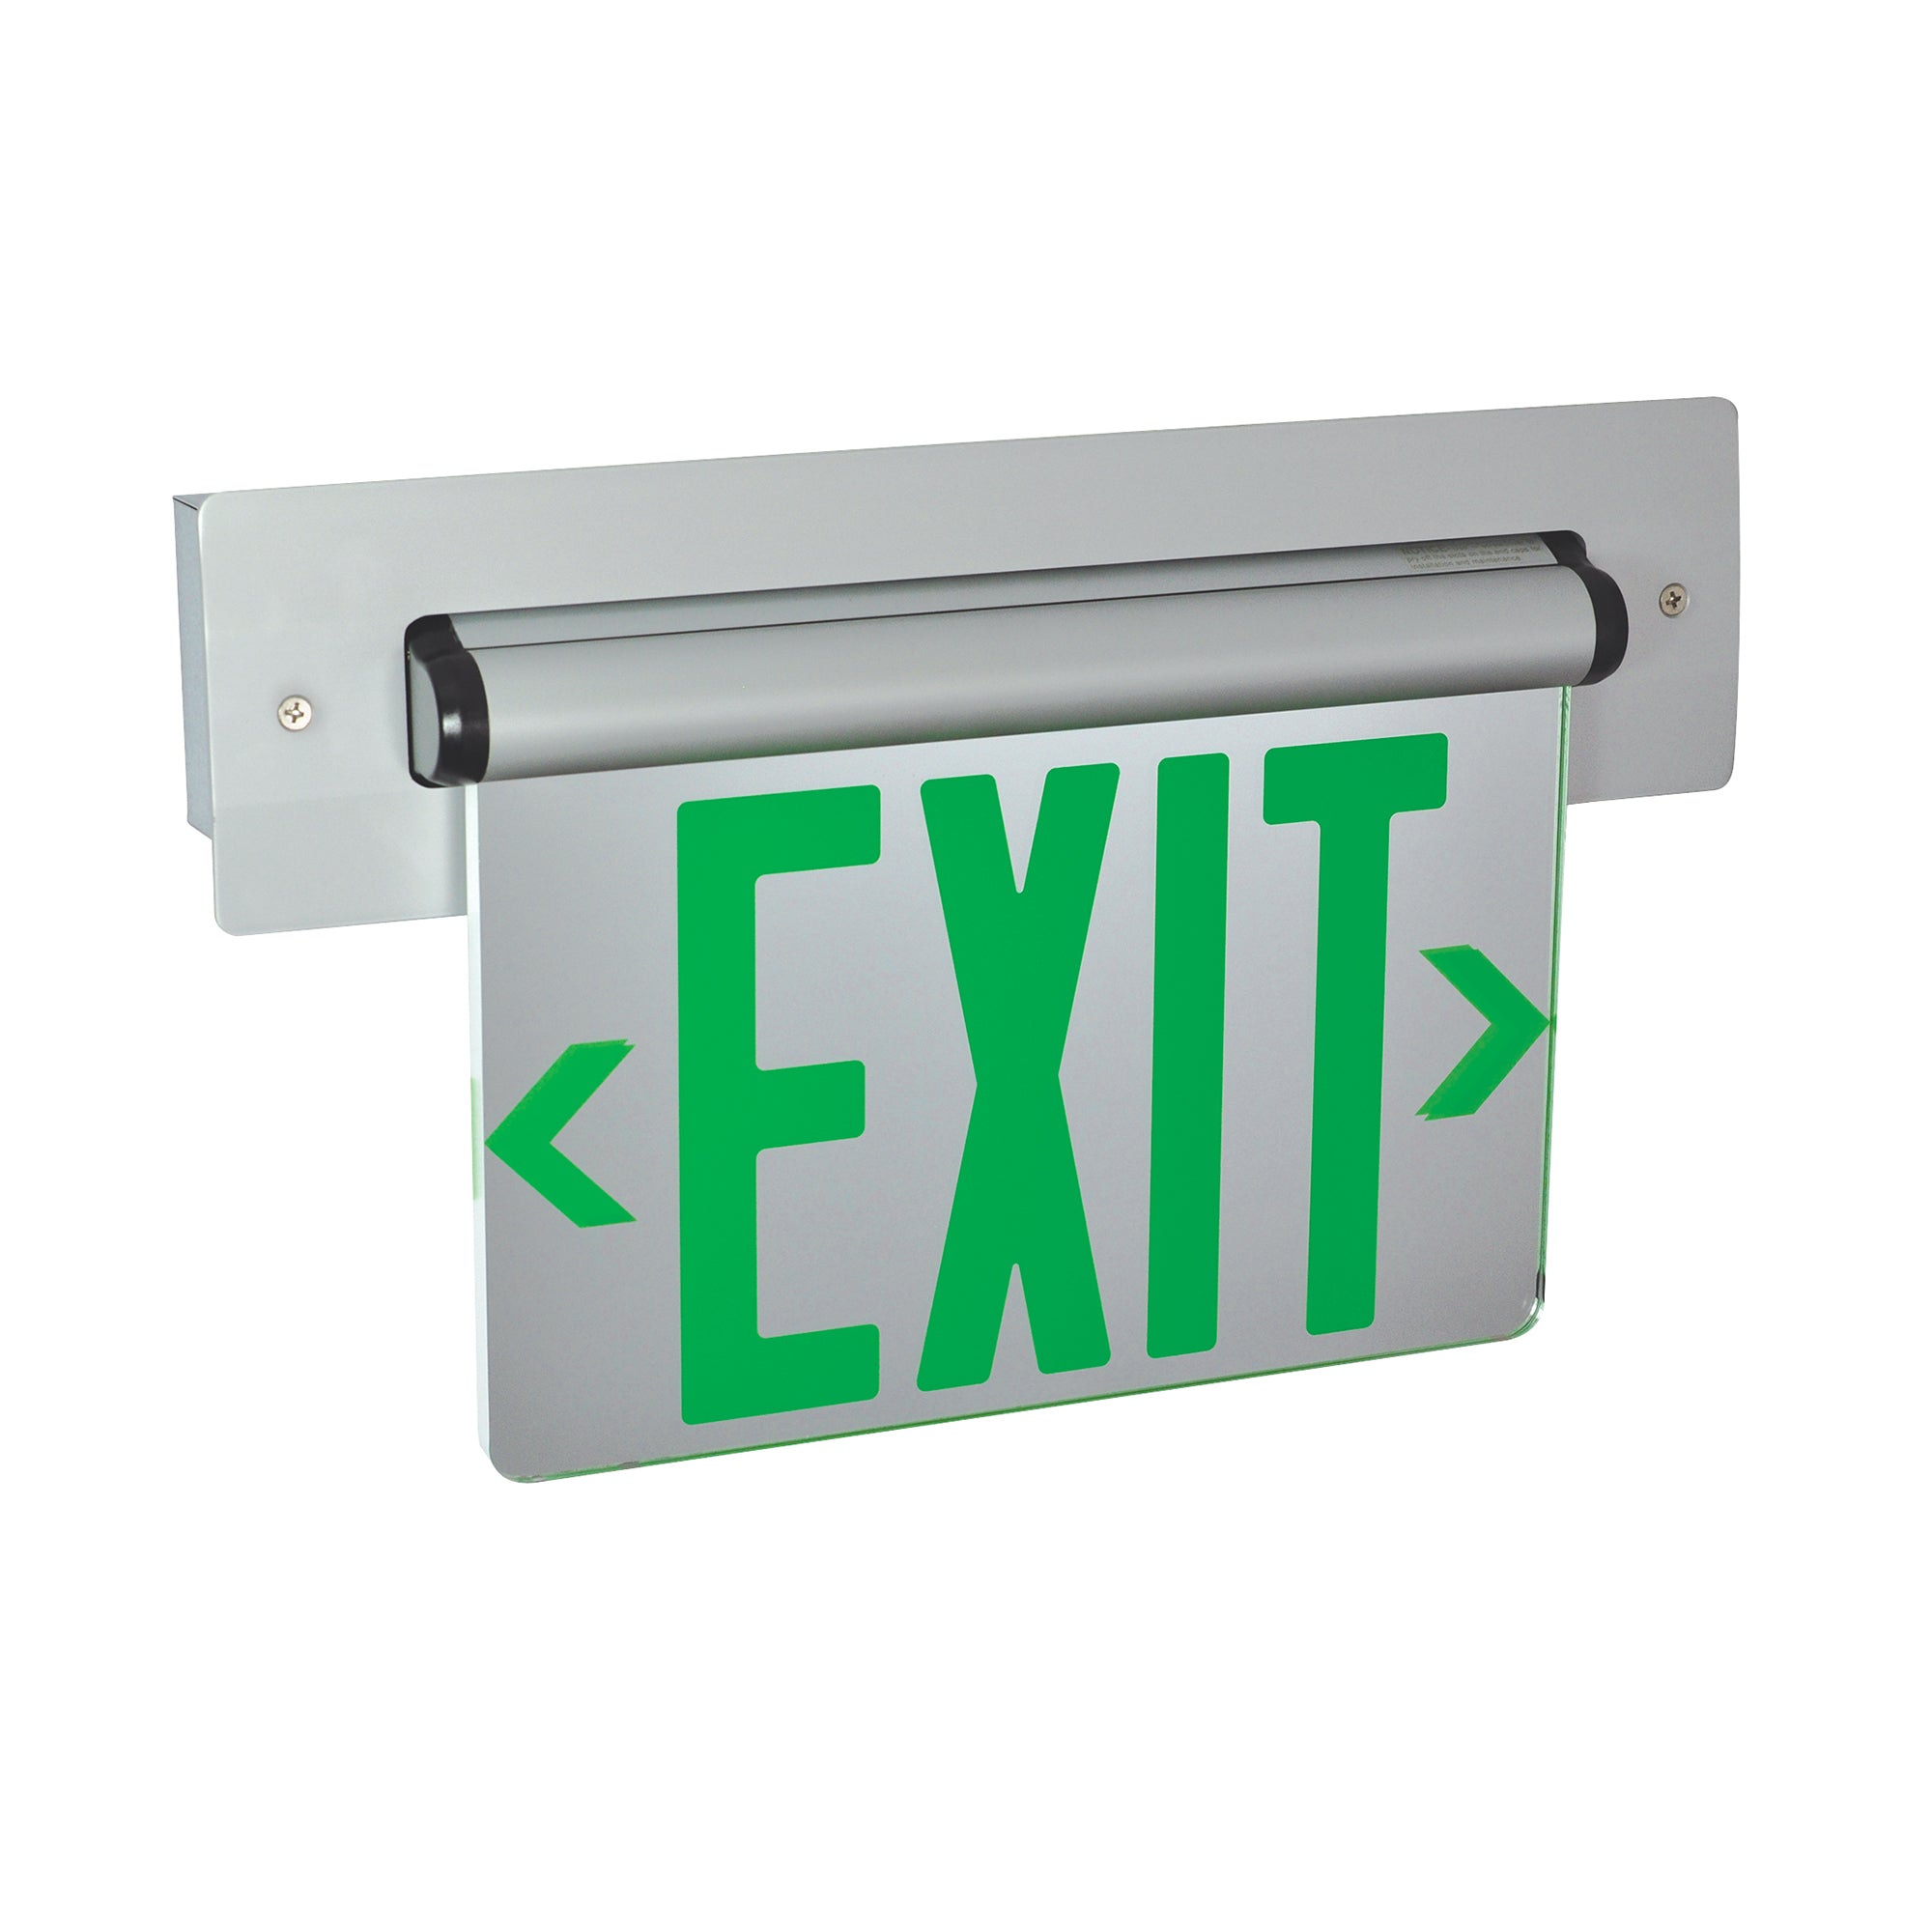 Nora Lighting NX-815-LEDGCW - Exit / Emergency - Recessed Adjustable LED Edge-Lit Exit Sign, Battery Backup, 6 Inch Green Letters, Single Face / Clear Acrylic, White Housing